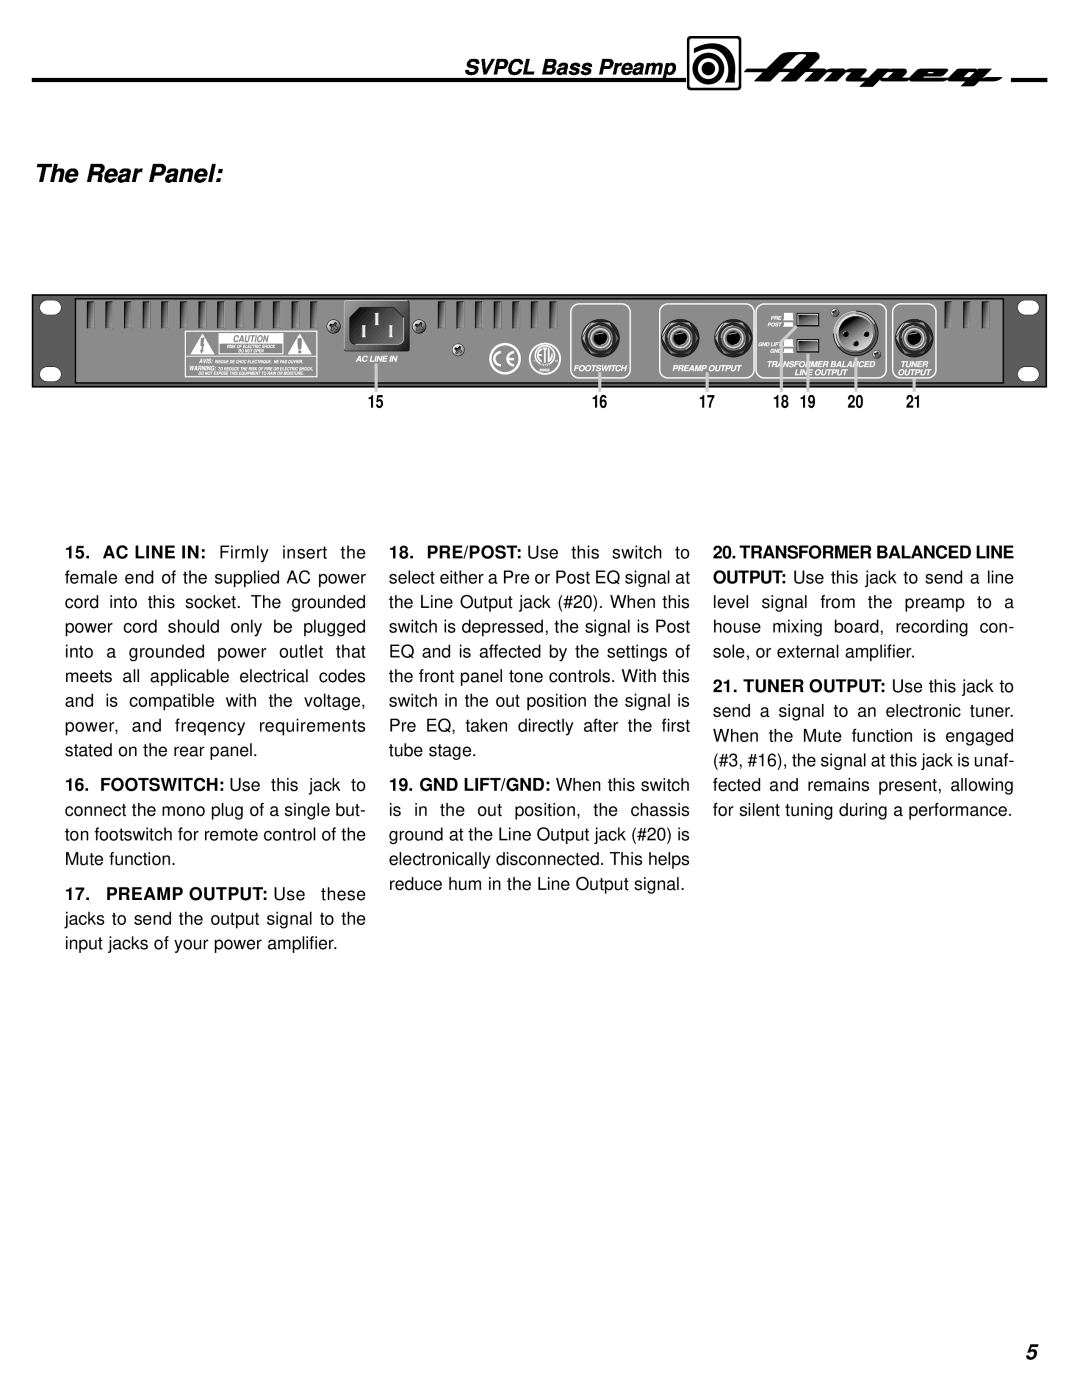 Ampeg manual The Rear Panel, SVPCL Bass Preamp 